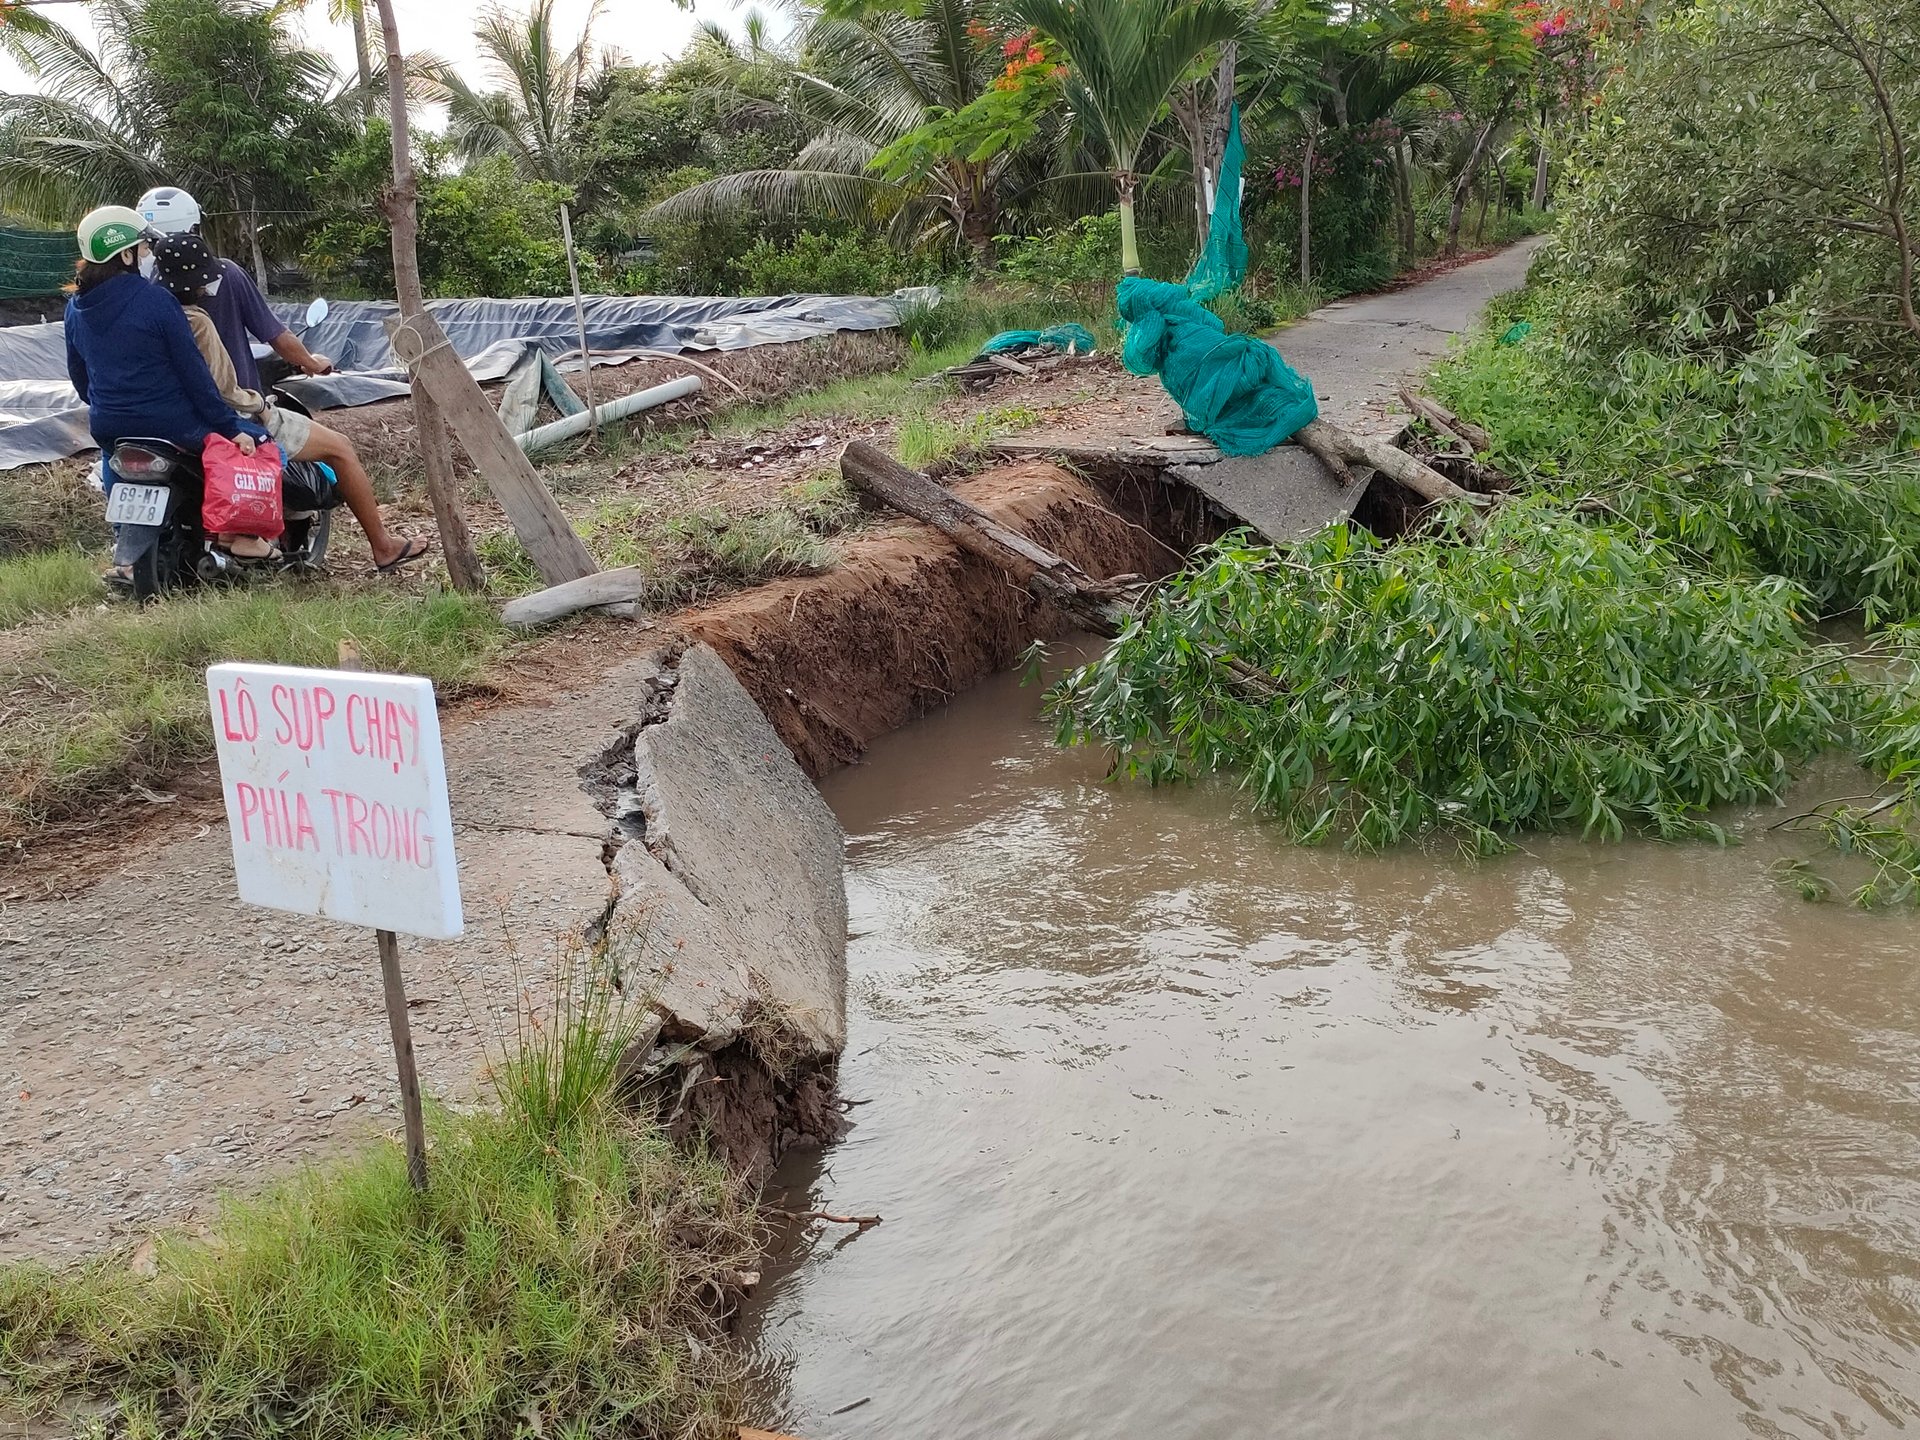 Land subsidence in the Mekong Delta region has grown increasingly severe in the last few years. Photo: Trong Linh.